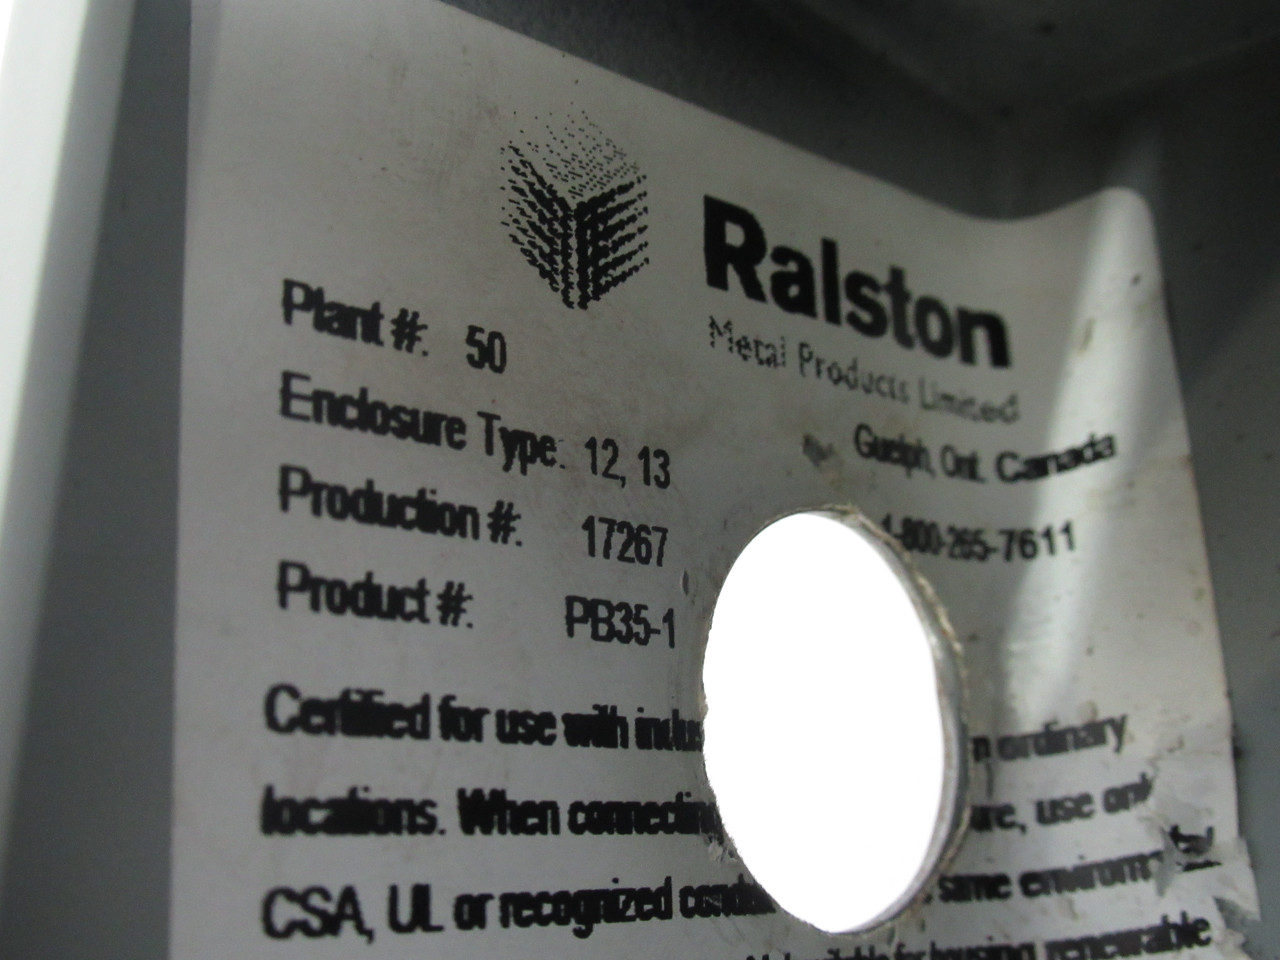 Ralston PB35-1 Push Button Enclosure 3-5/8x2-3/4" *1 Hole in Side* USED